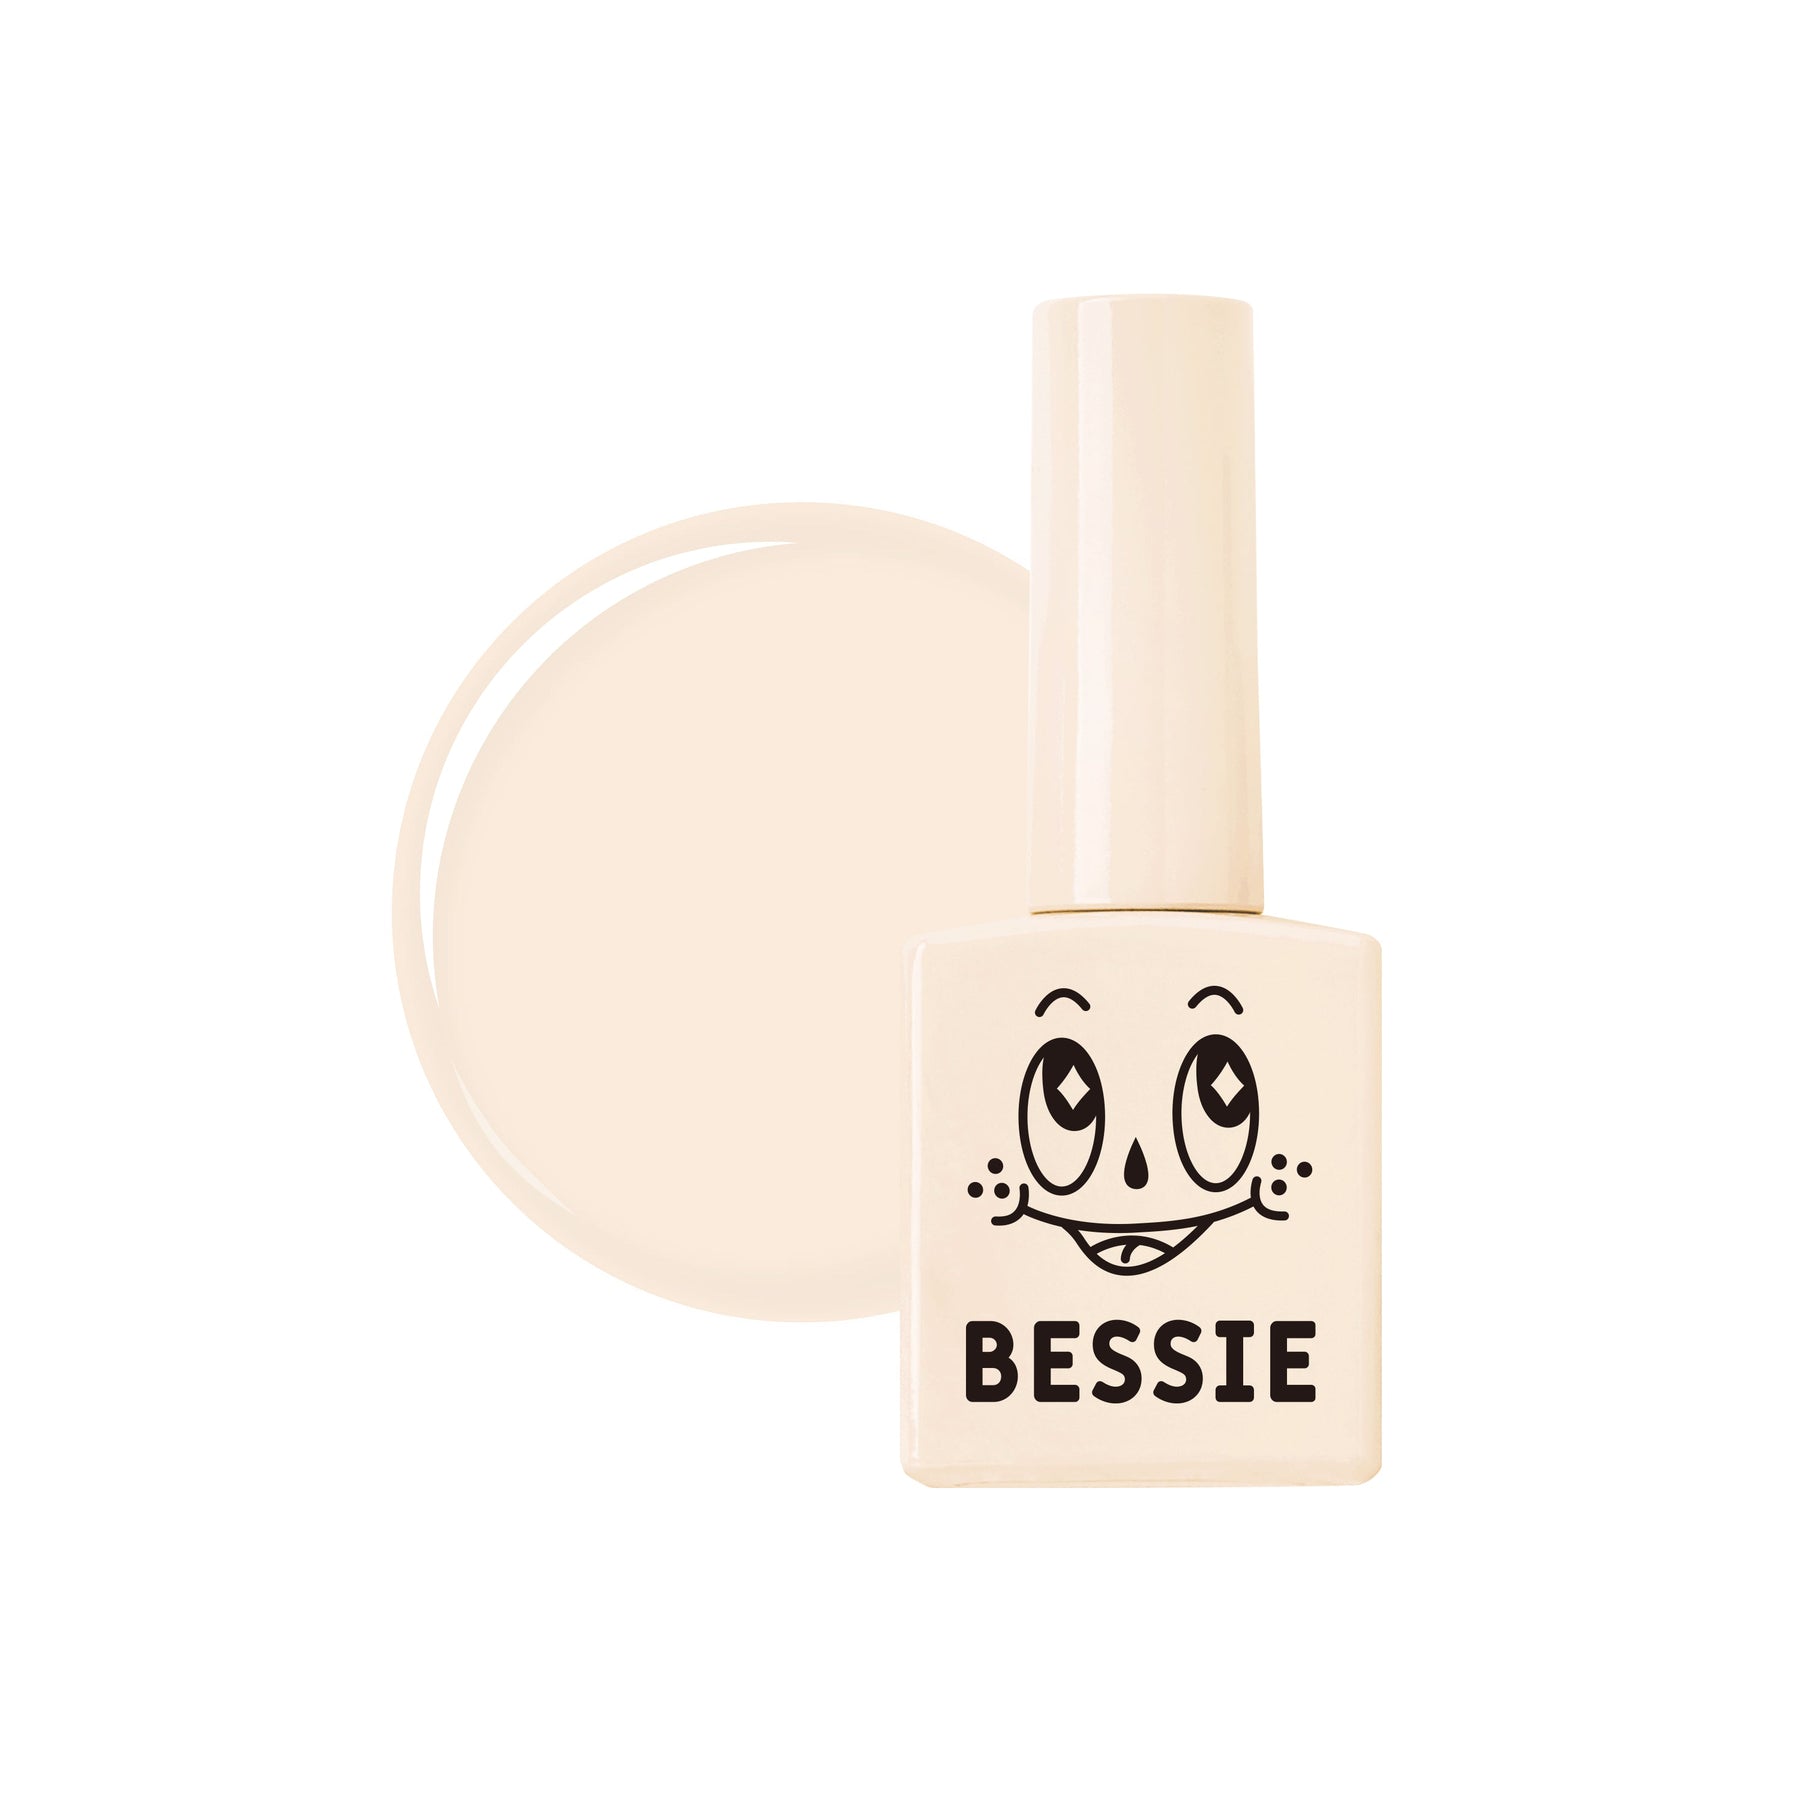 Bessie Individual Colour Syrup Gels - 1pc